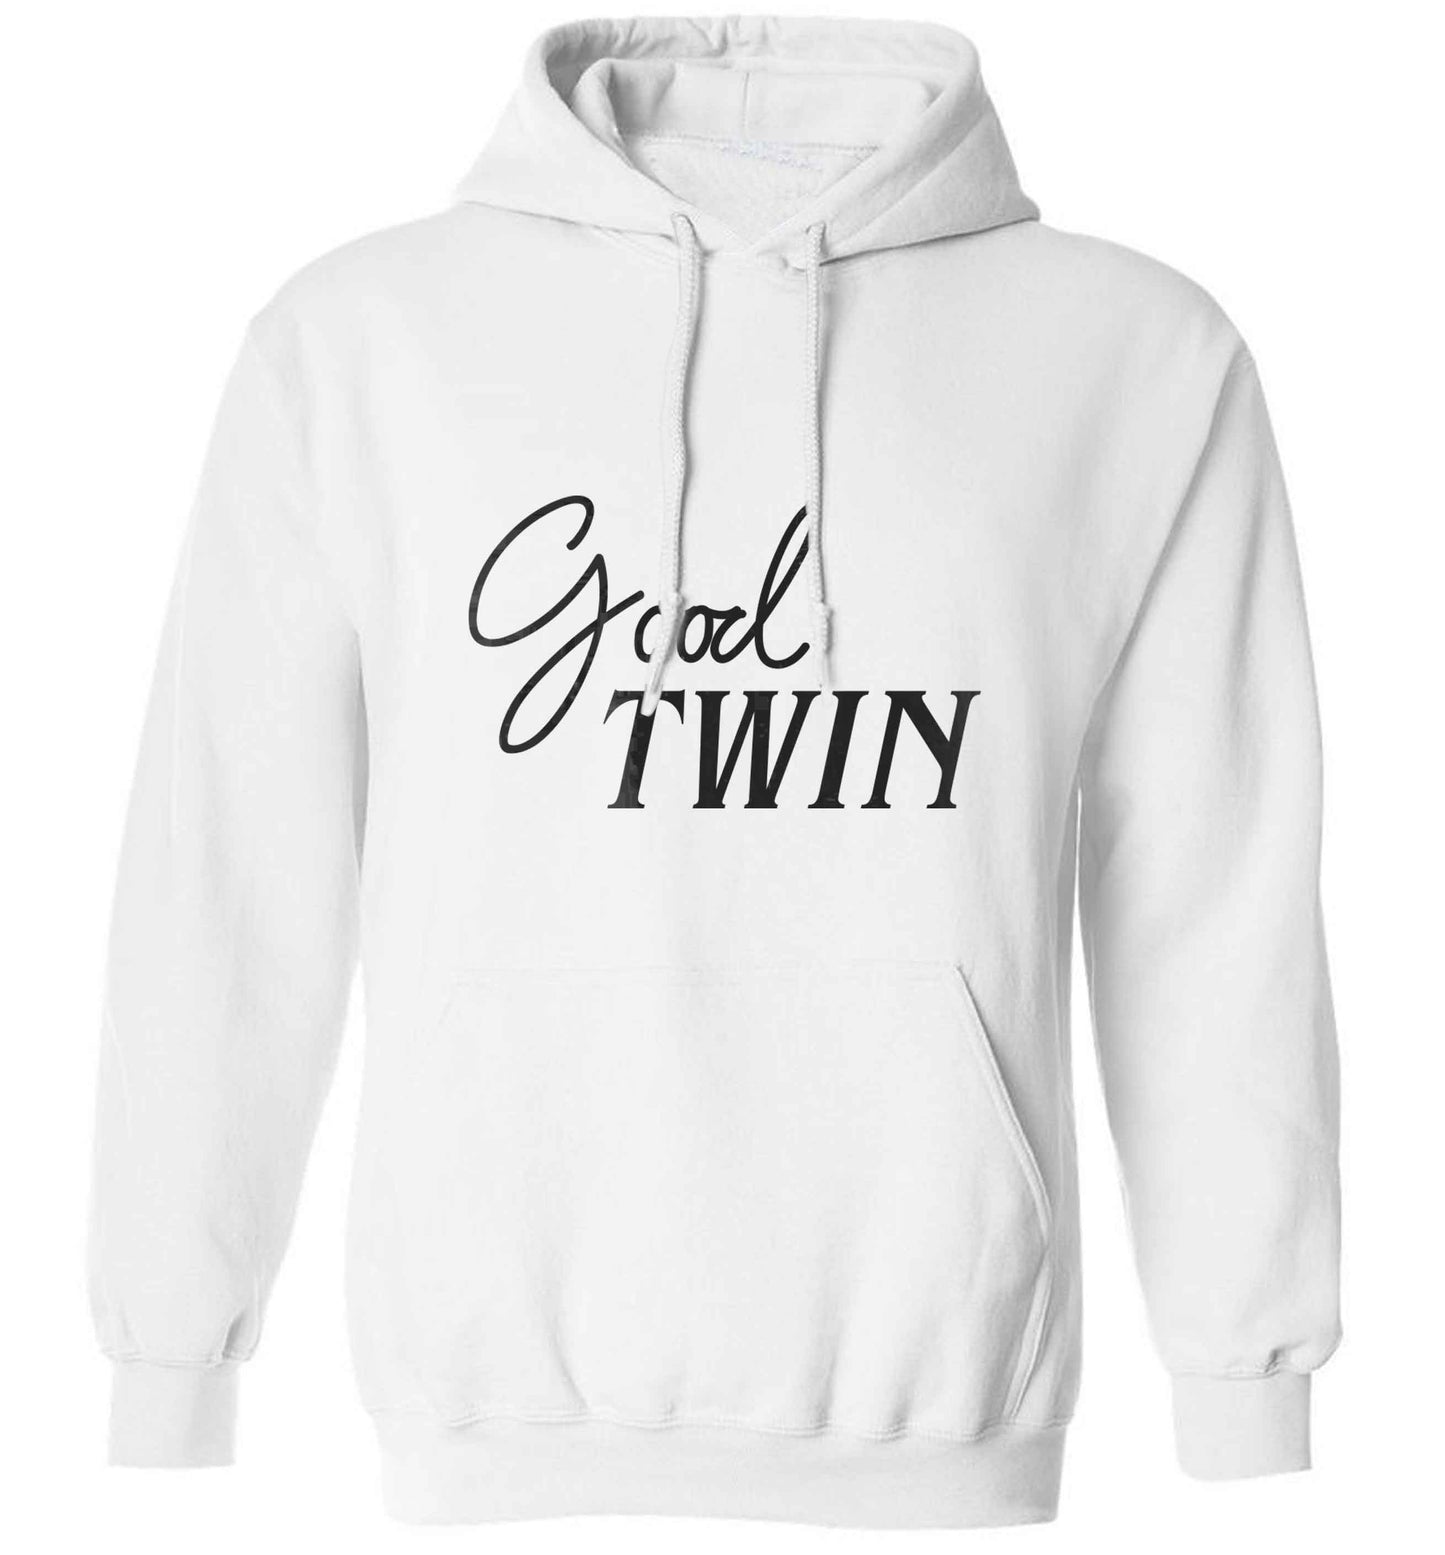 Good twin adults unisex white hoodie 2XL